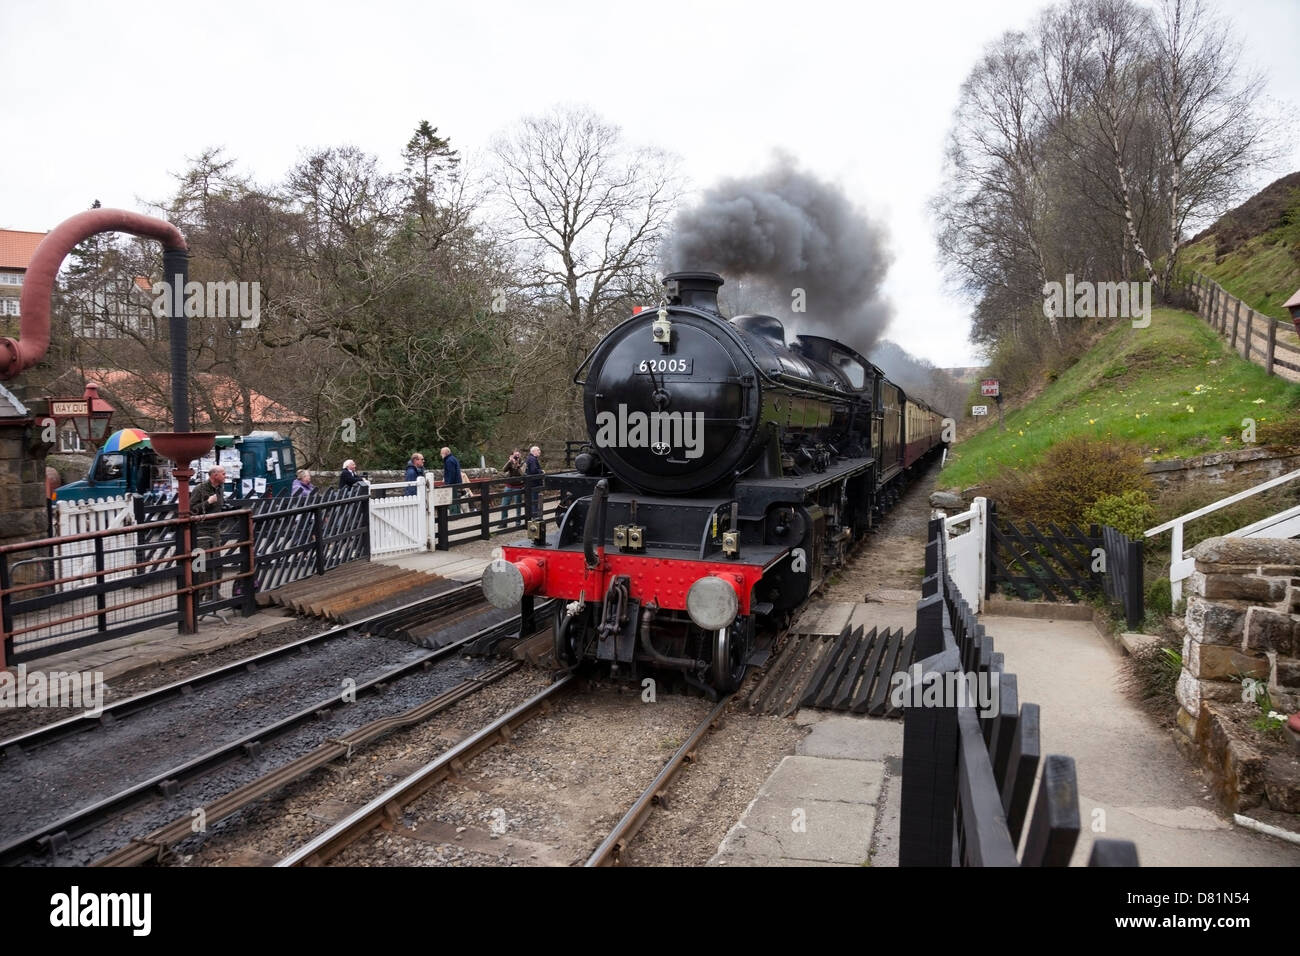 The Lord of the Isles Steam Locomotive 62005 Entering Goathland Station North Yorks Moor Railway Yorkshire UK Stock Photo